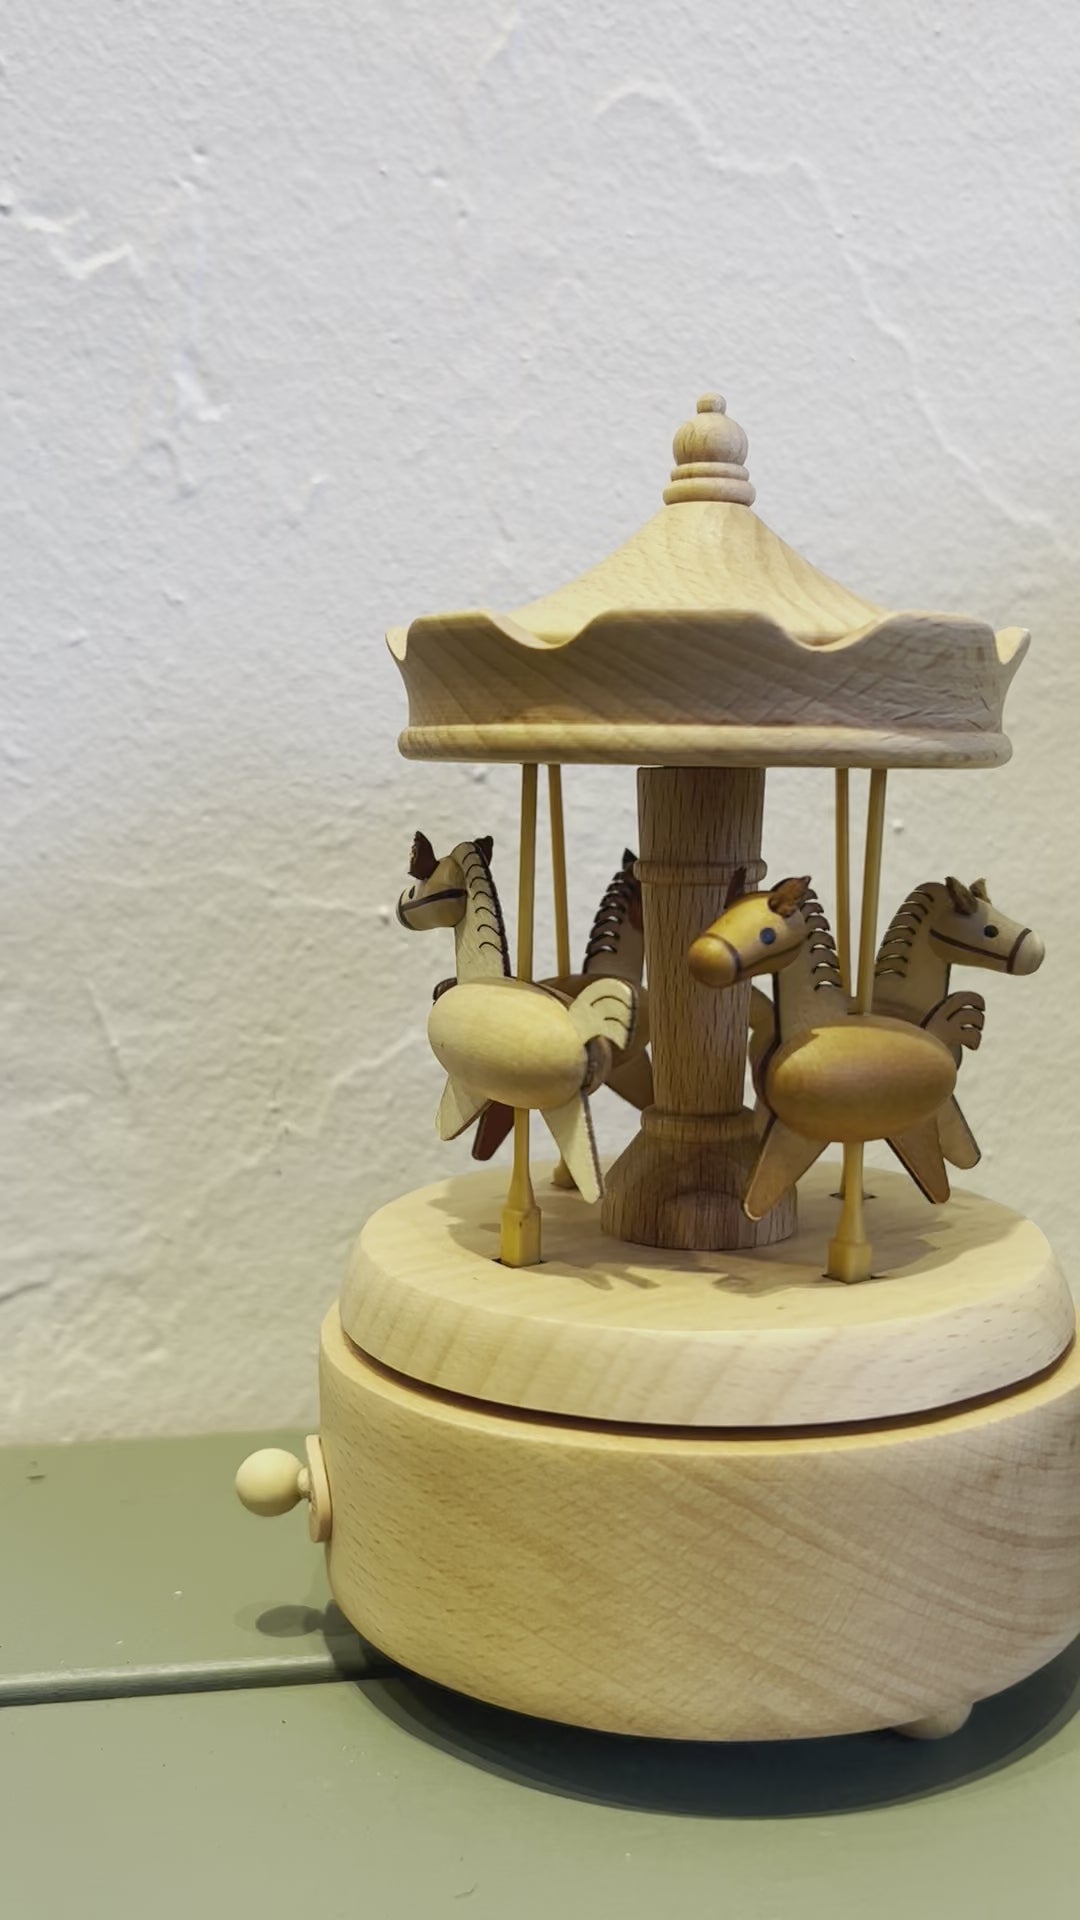 Small horses on carousel.